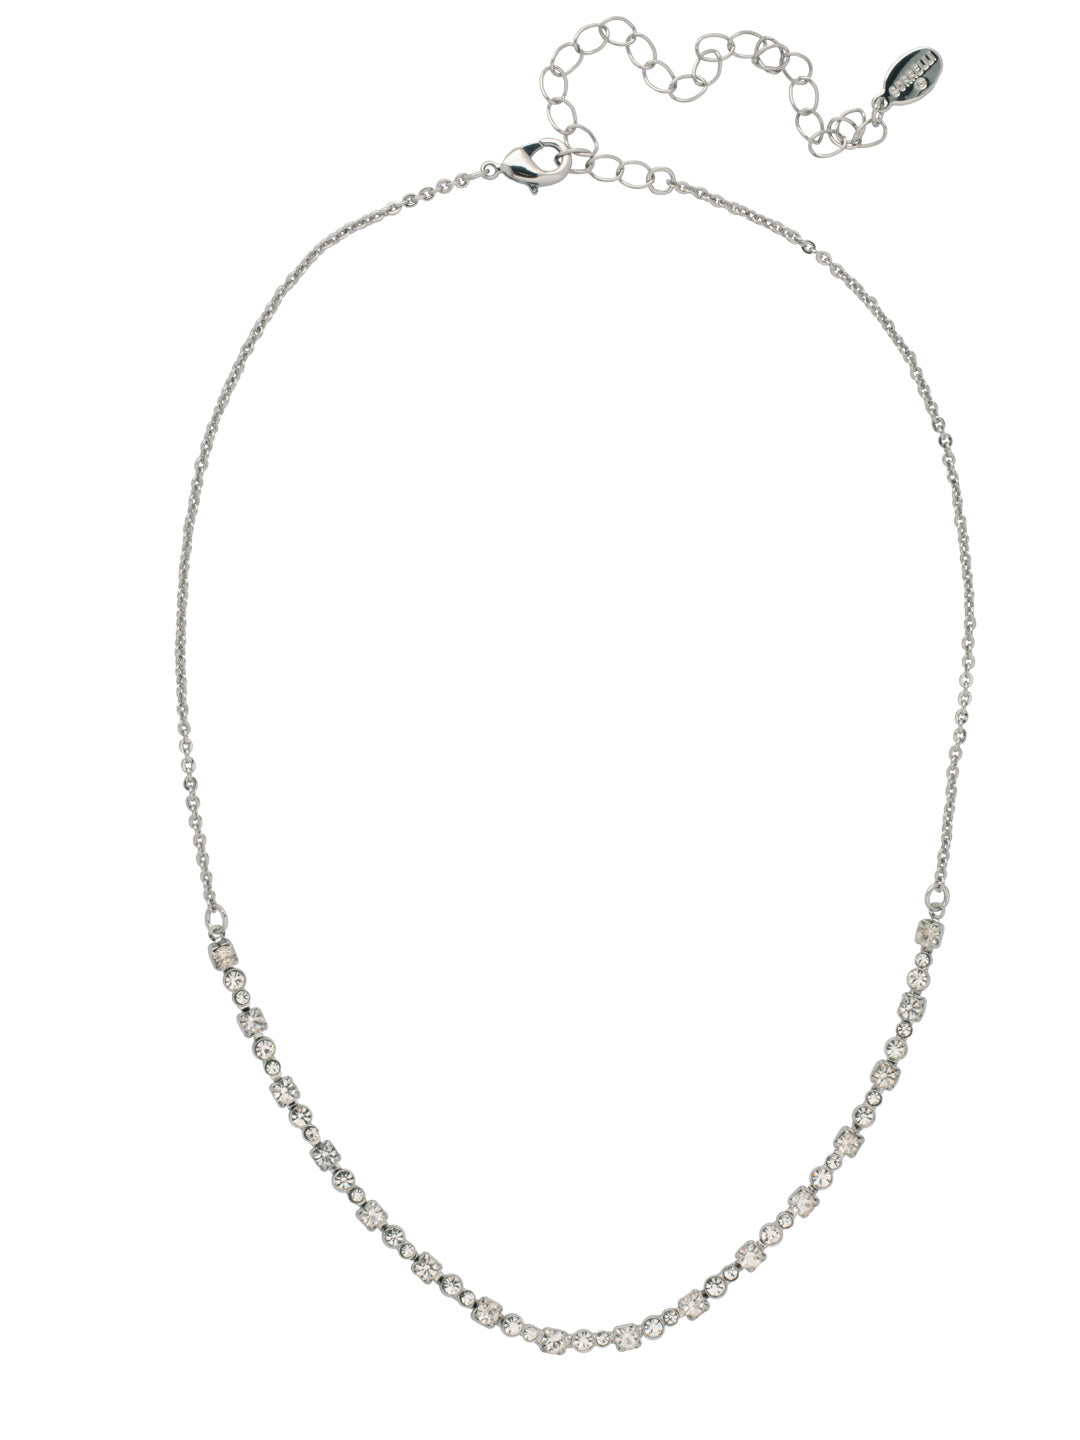 Narcissa Tennis Necklace - NFH10PDCRY - <p>The Narcissa Tennis Necklace features a very delicate row of various round cut crystals on a small adjustable chain, secured by a lobster claw clasp. From Sorrelli's Crystal collection in our Palladium finish.</p>